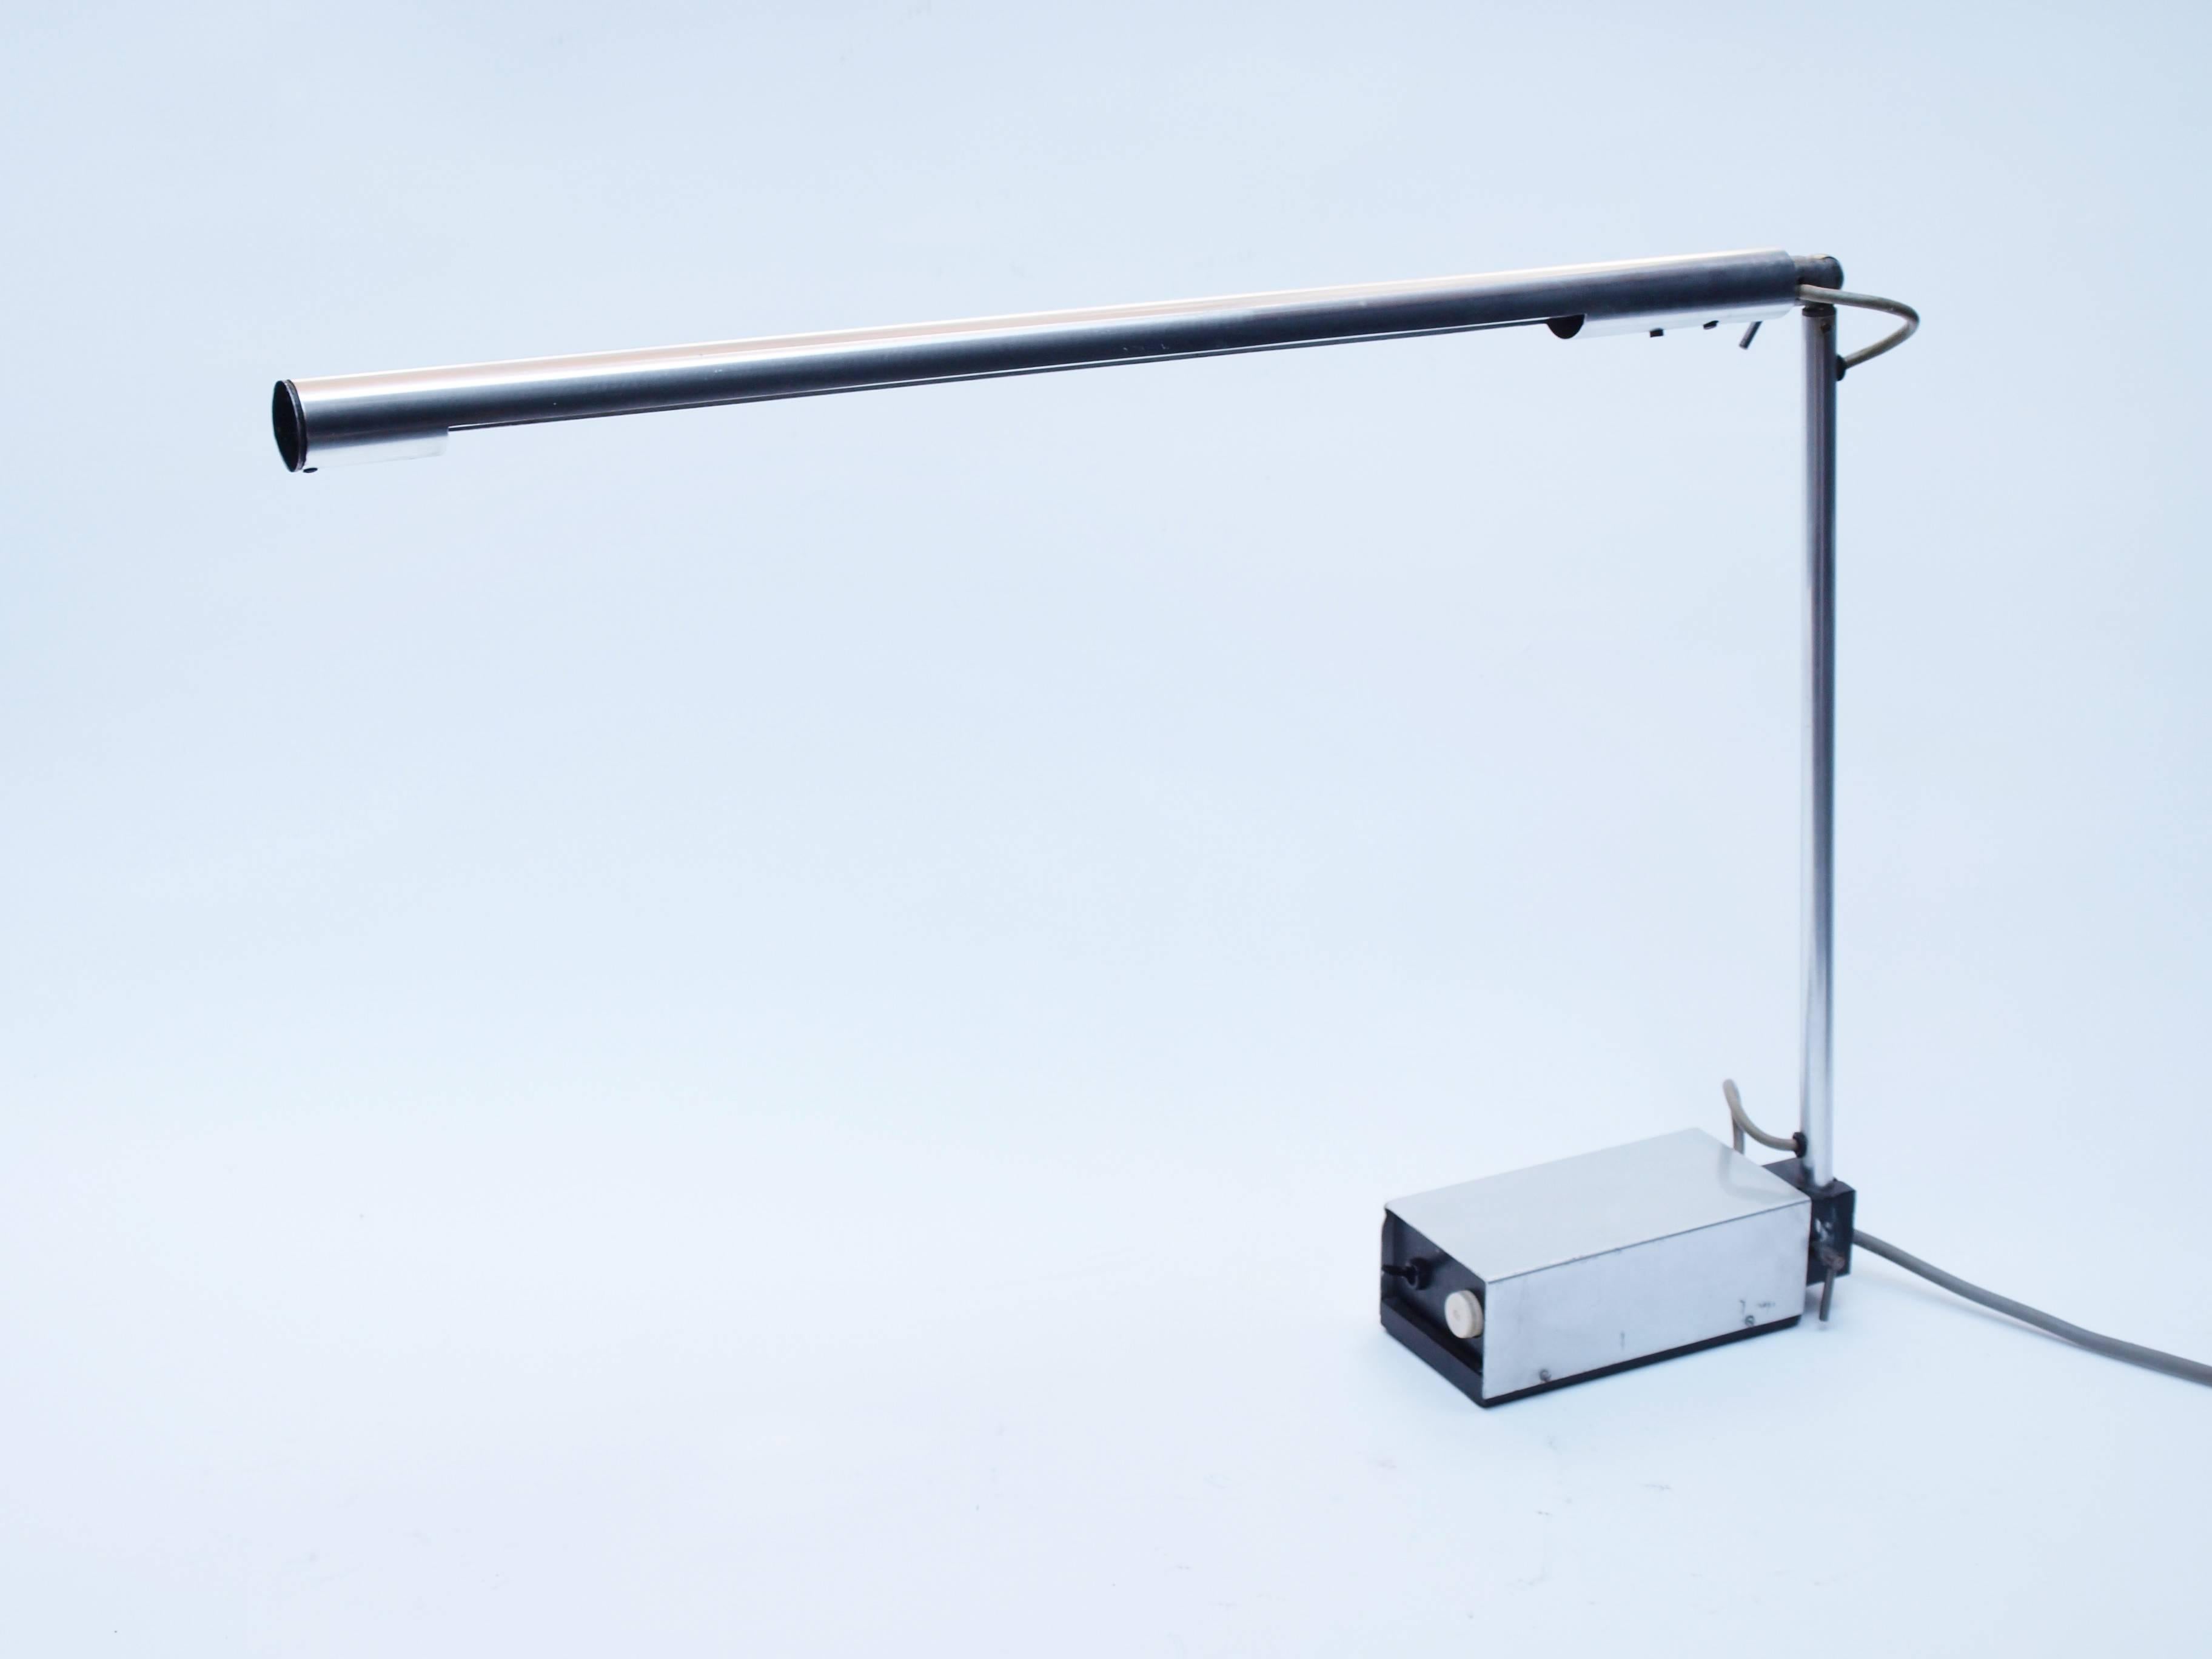 Great Britain (UK) Gerald Abramovitz MkII Desk Lamp manufactured in 1964 by Best & Lloyd For Sale